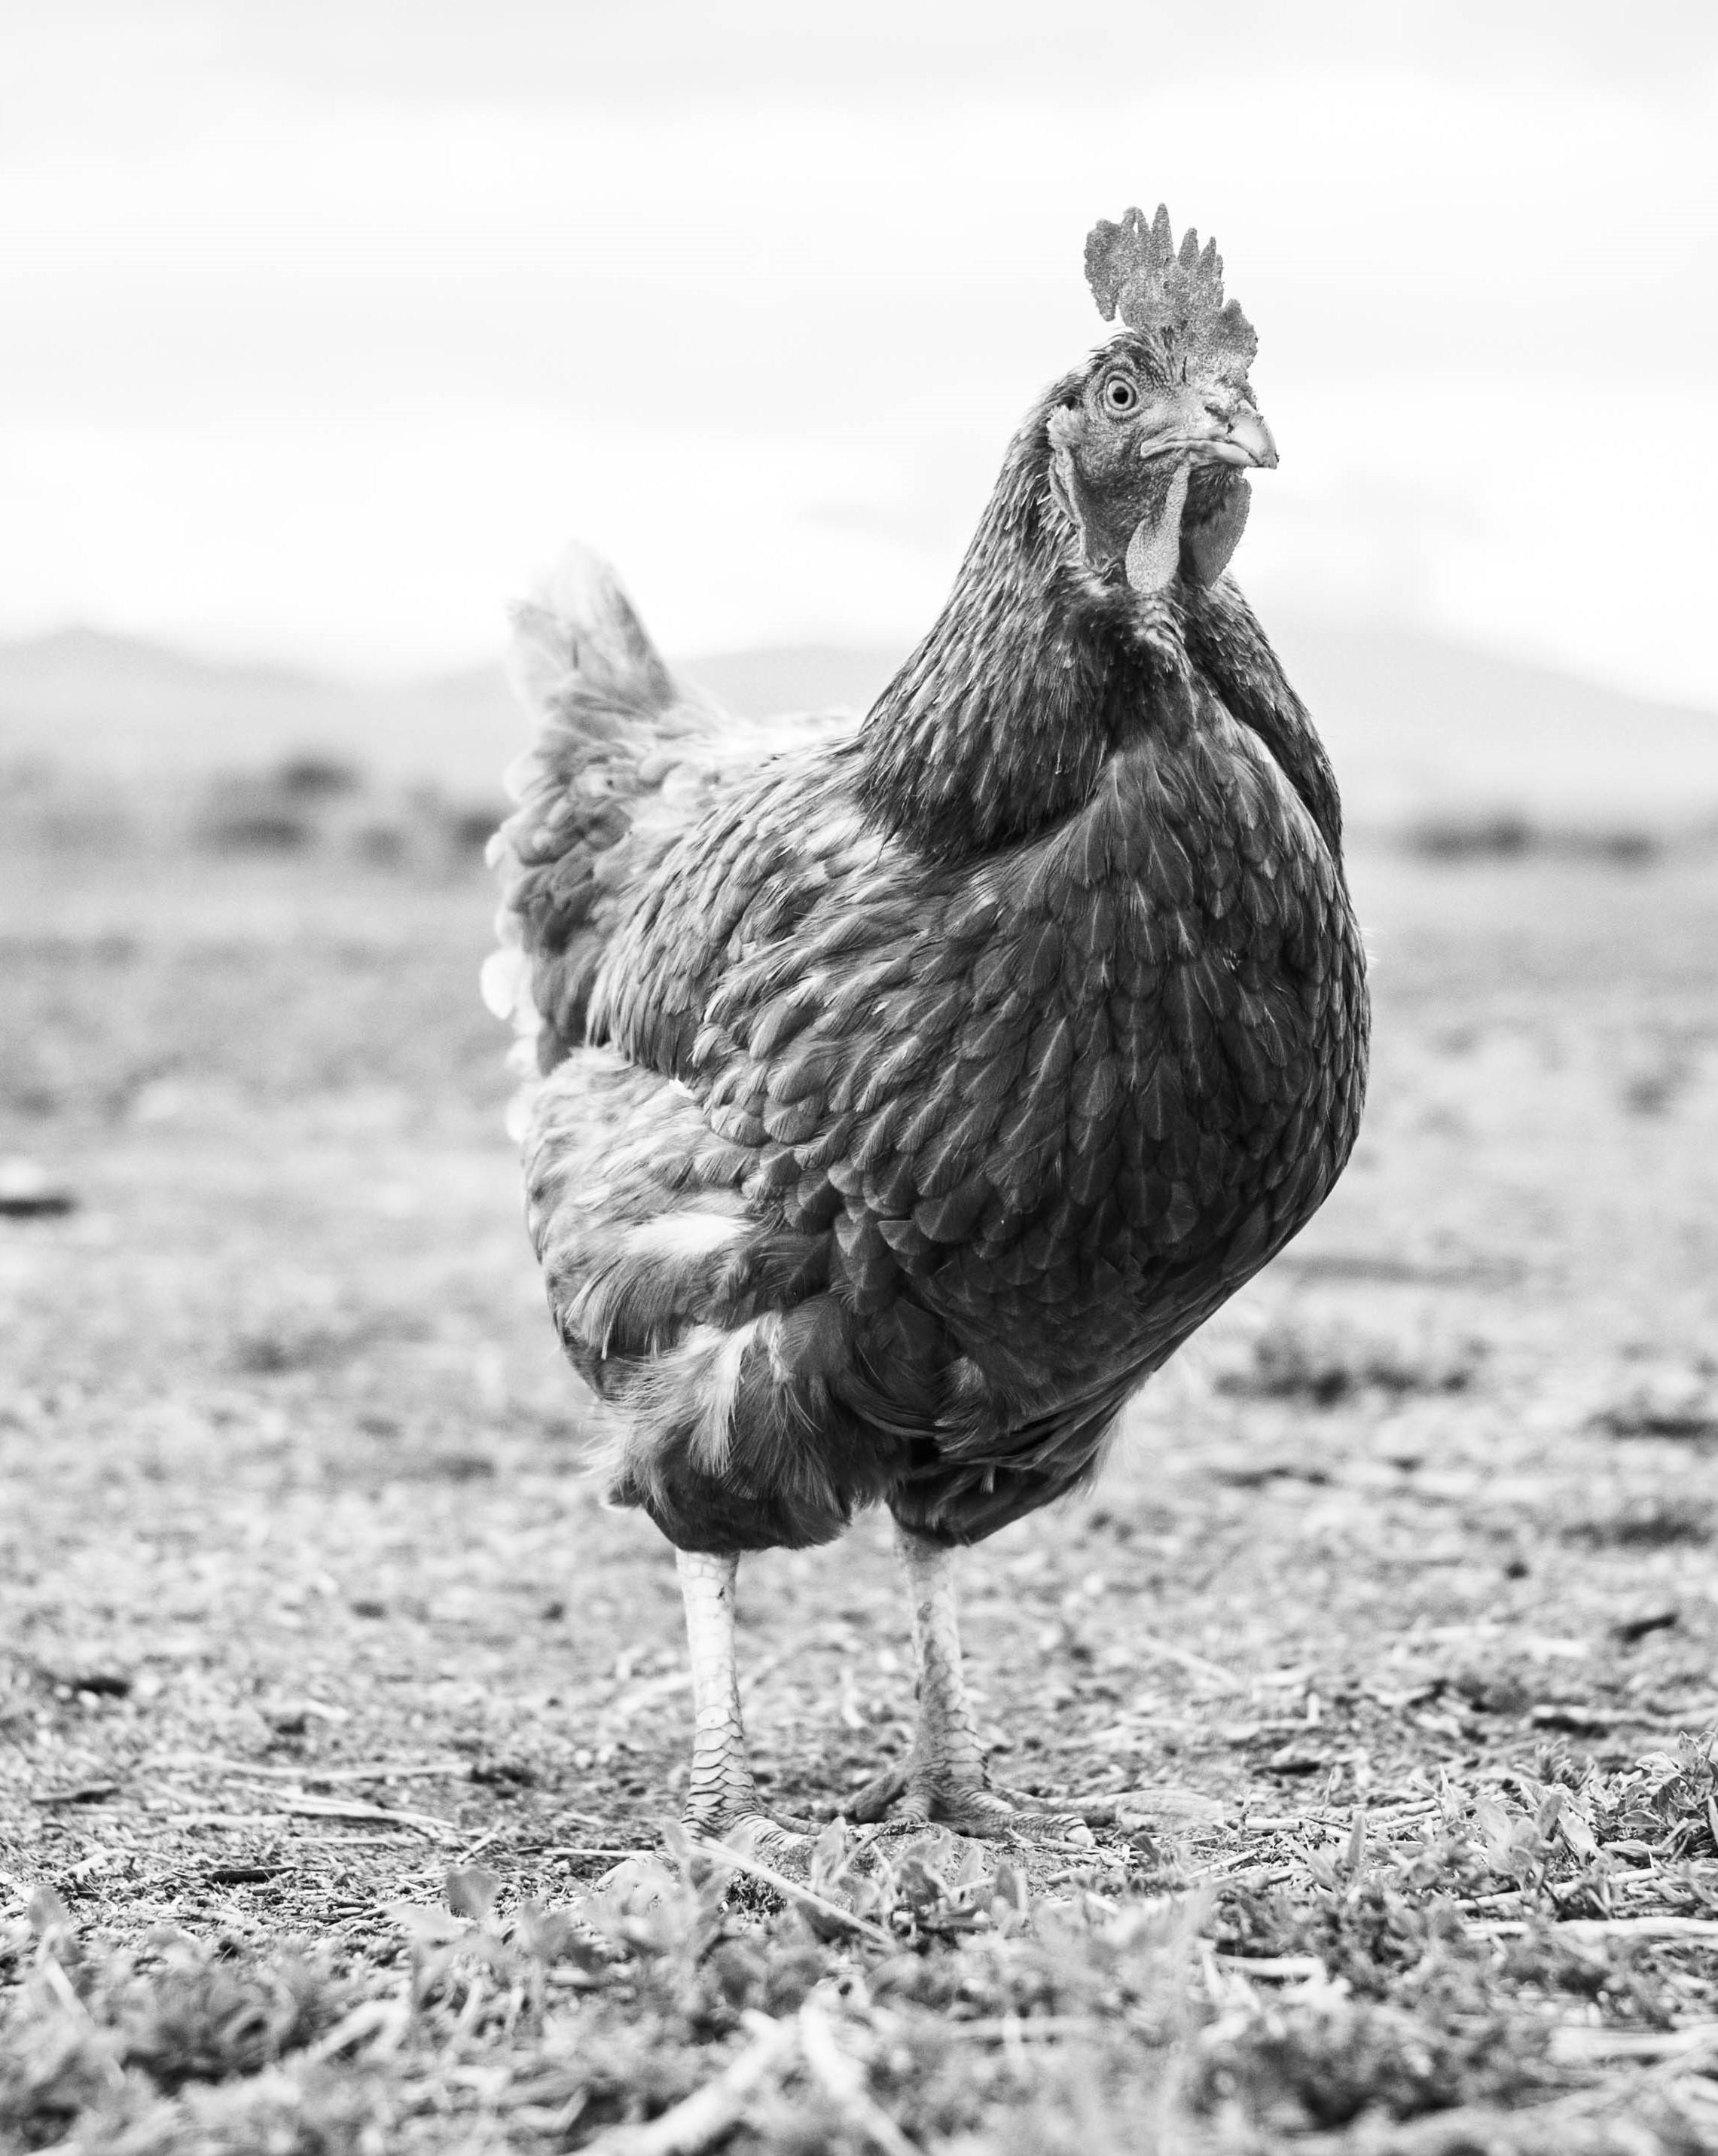 Rooster, Colorado - Black & White Photo of A Cocky Rooster in a Sparse Landscape - Photograph by Kirill Polevoy